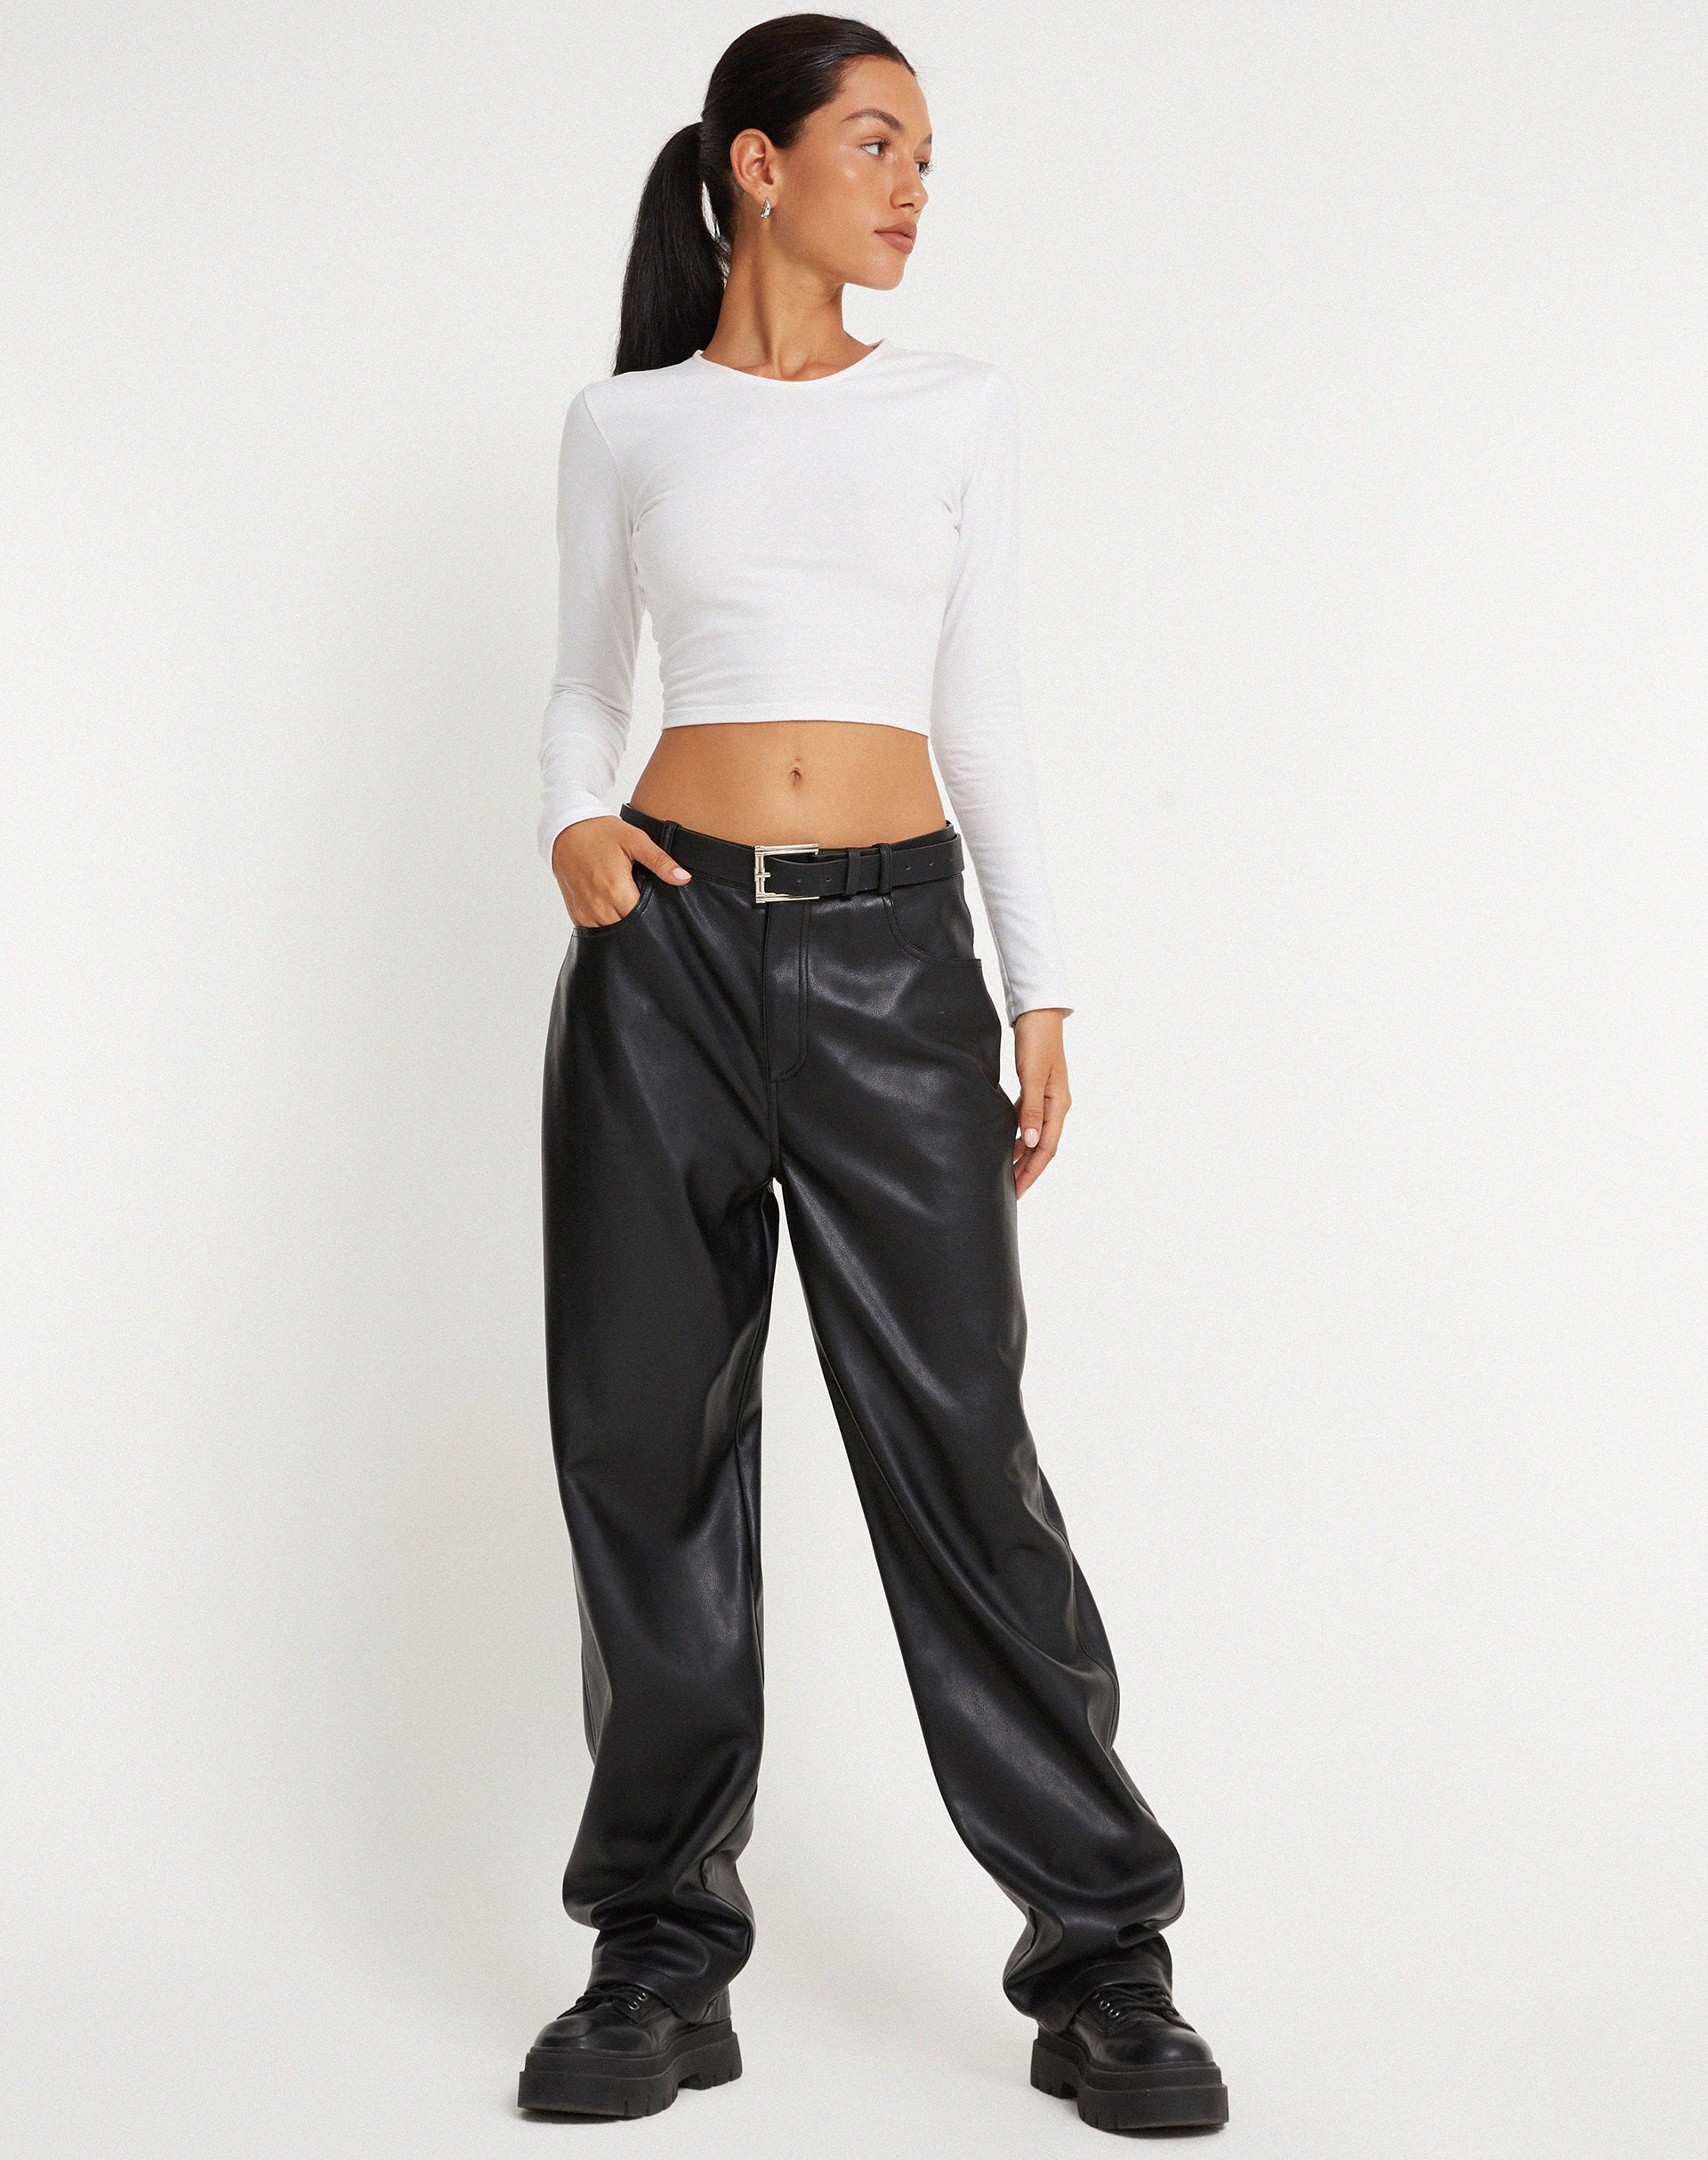 Image of MOTEL X OLIVIA NEILL Parallel Trouser in Pu Black